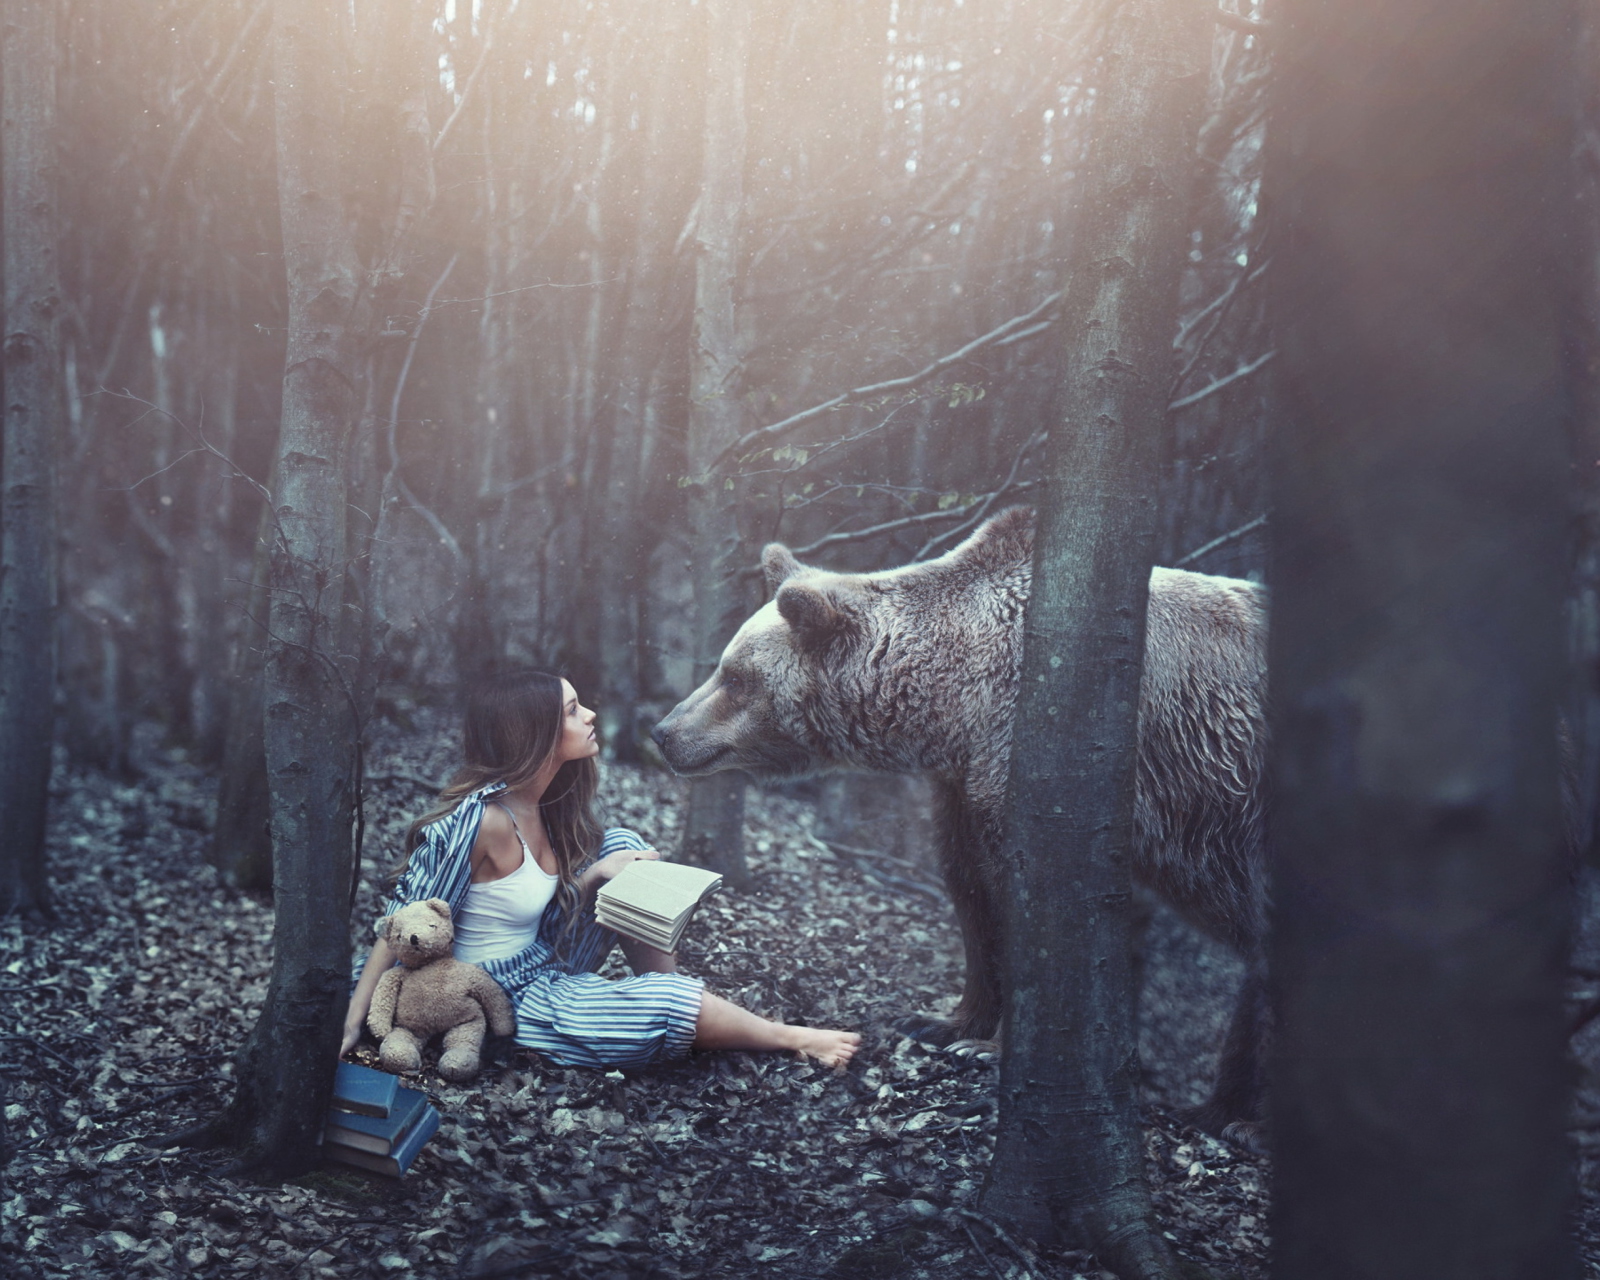 Girl And Two Bears In Forest By Rosie Hardy Photographer screenshot #1 1600x1280